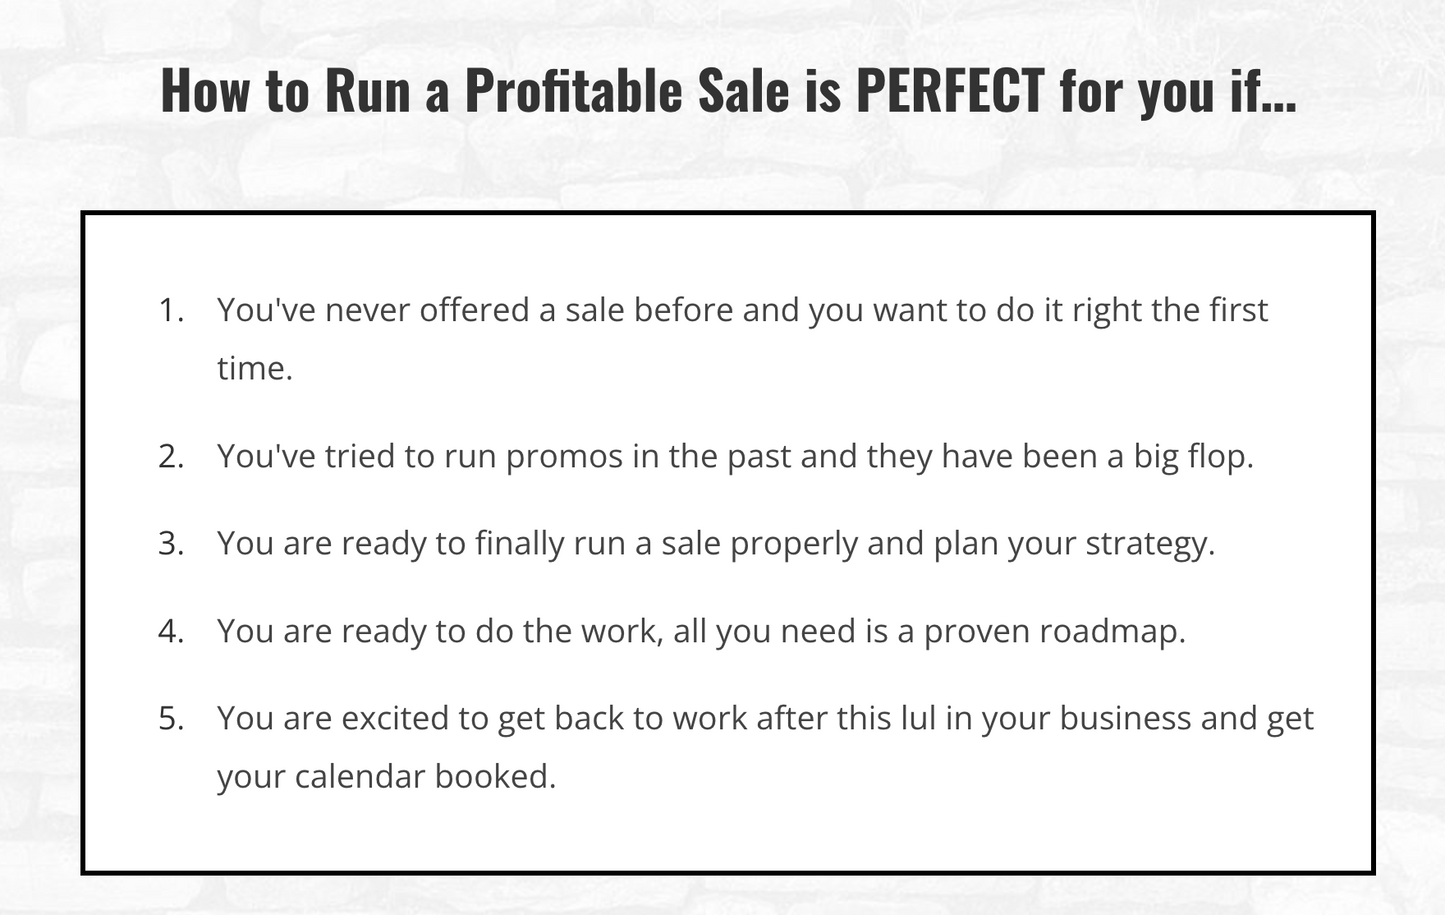 How to Run a Profitable Black Friday (or anytime) Sale